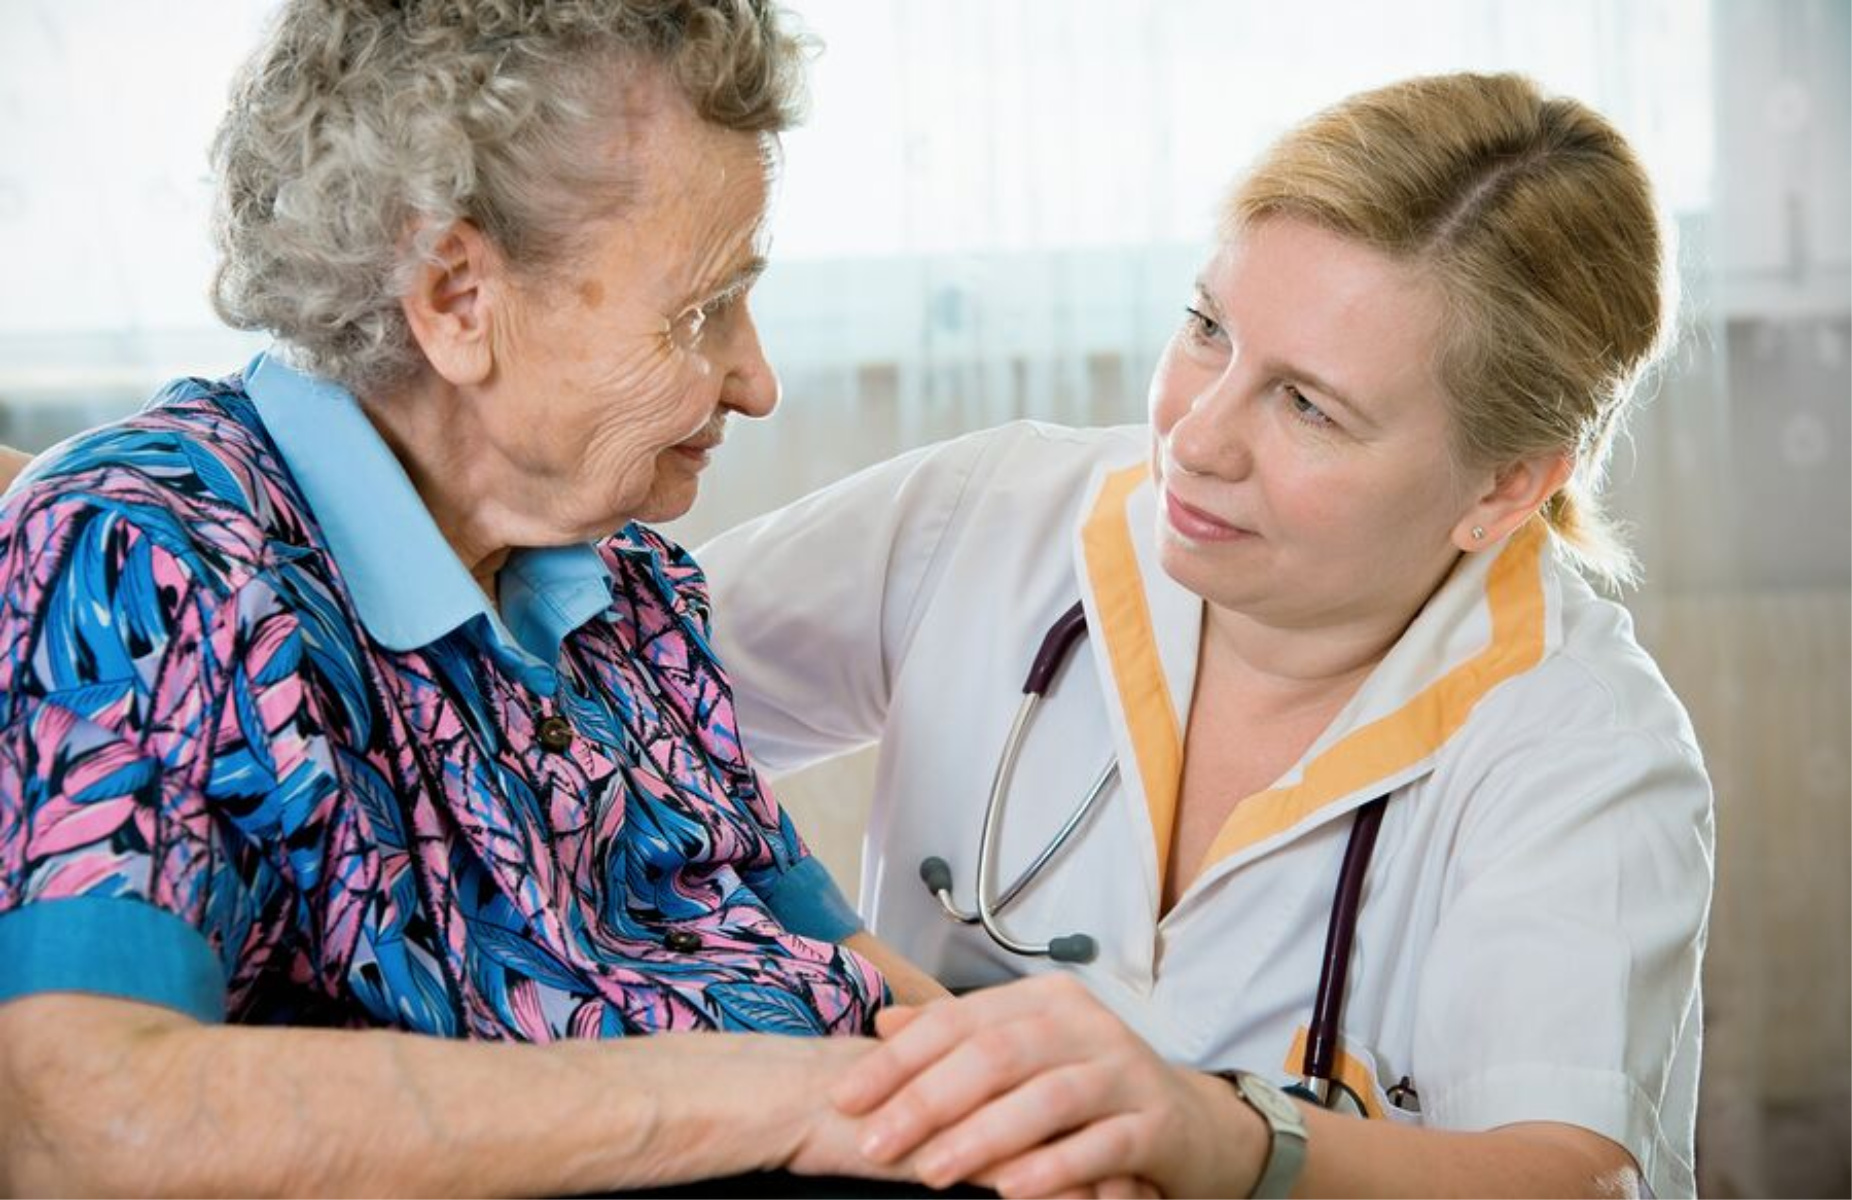 Home Health Care: Five Common Infections in the Elderly That’s Aided by Home Health Care Nurses